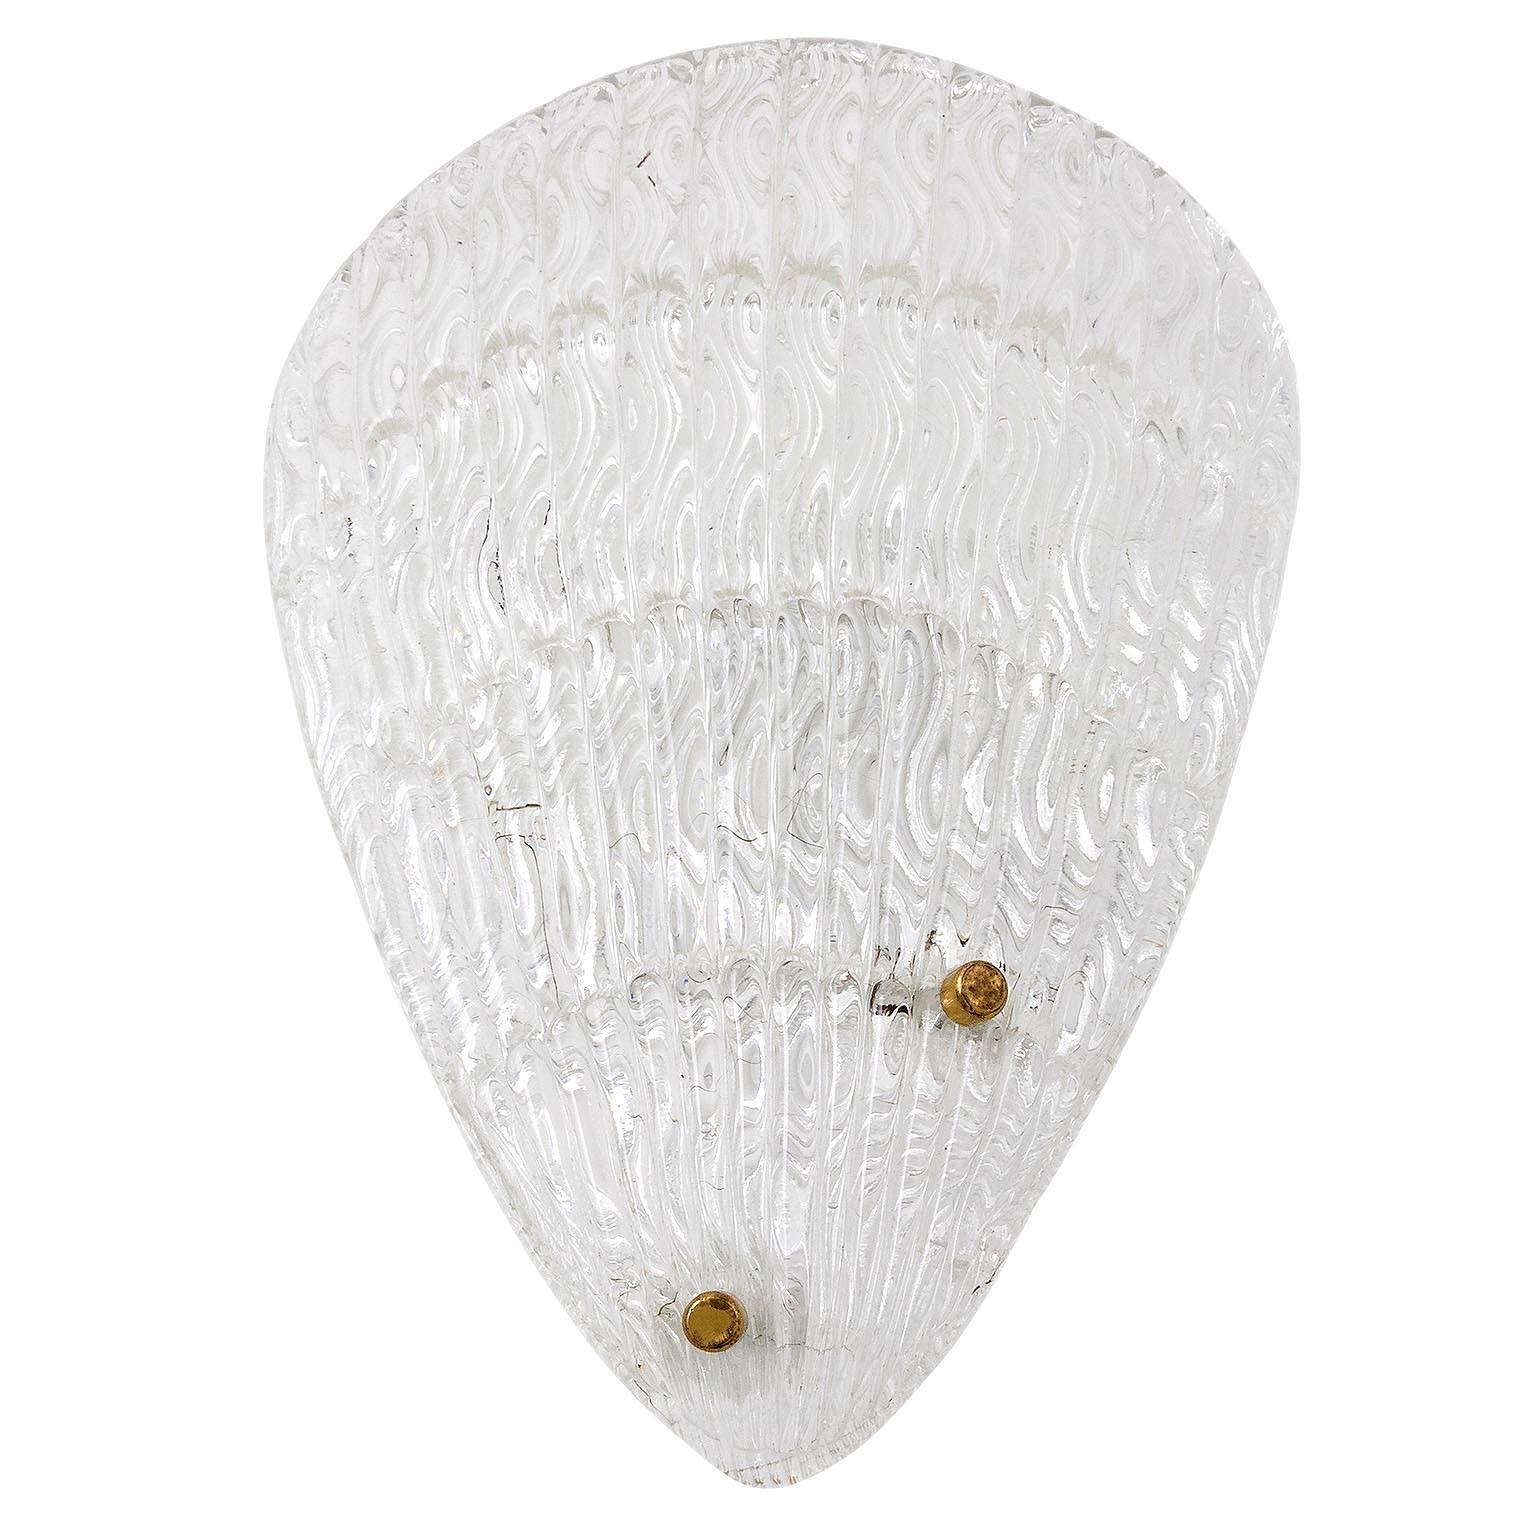 A pair of large shell shaped glass sconces by Rupert Nikoll, Austria, manufactured in Mid-Century, circa 1950 (late 1950s or early 1960s).
An organic shaped glass piece is mounted with brass bolts on a white painted metal backplate.
The textured